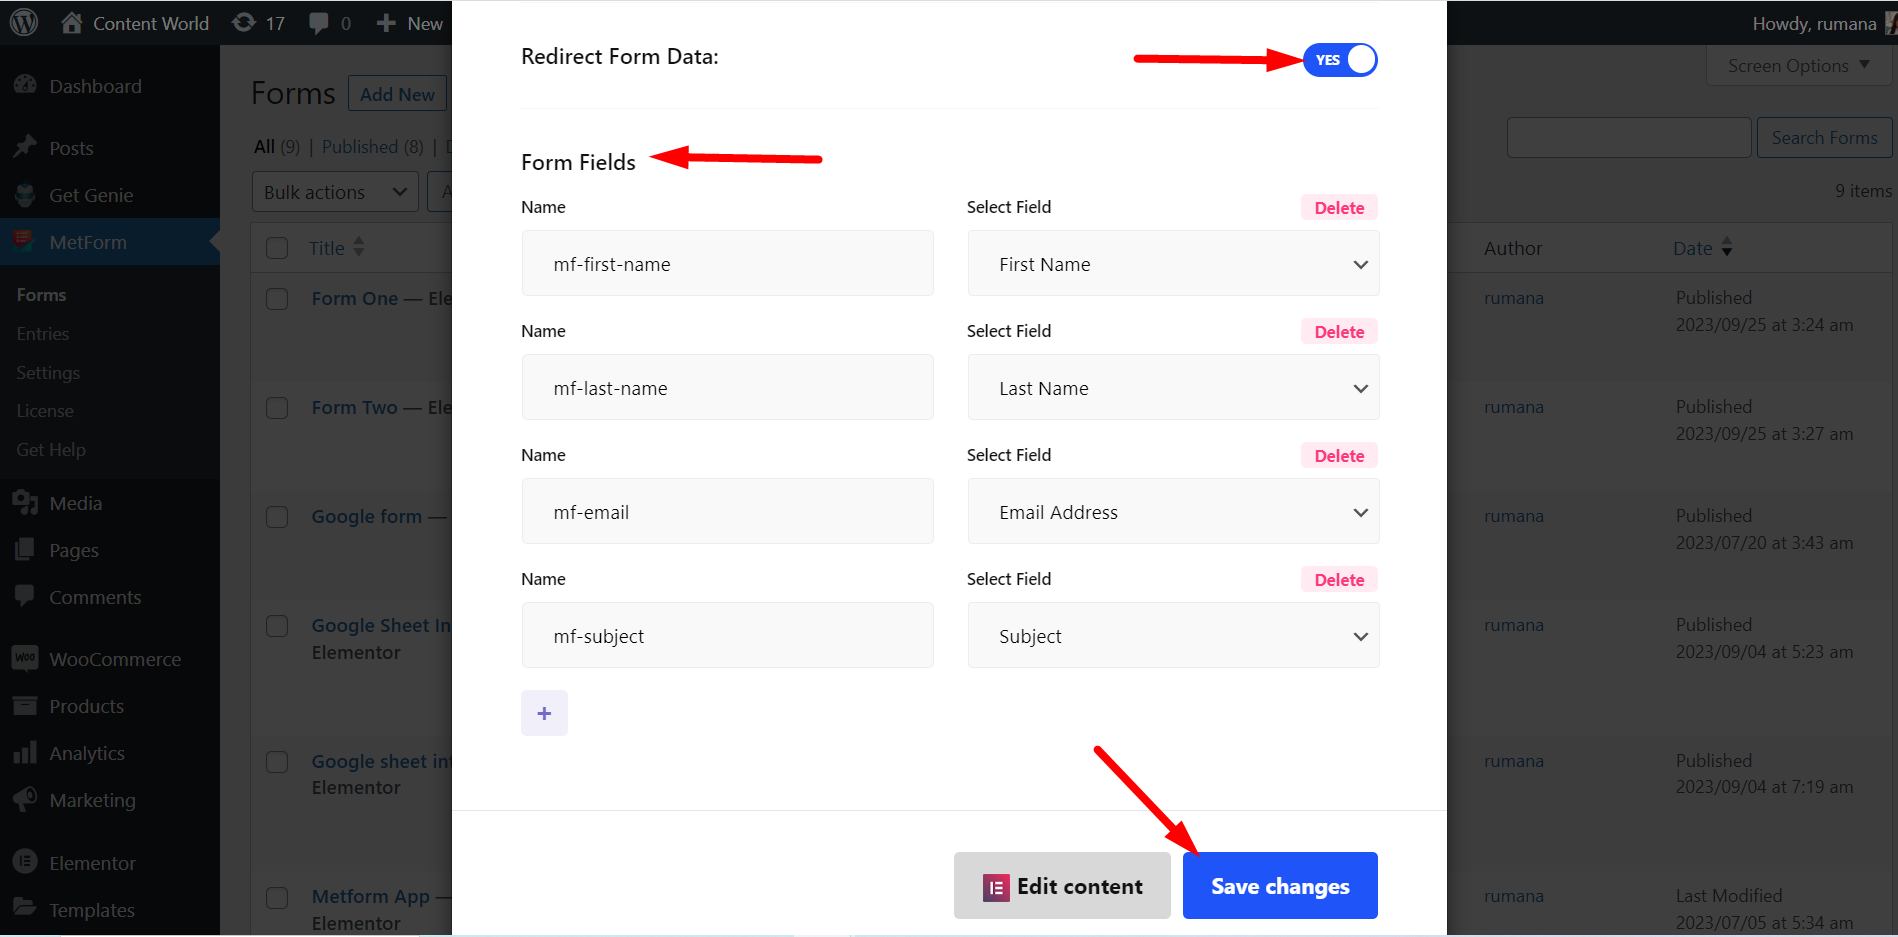 Enable redirect form data button to add fields to pass data from one to another form